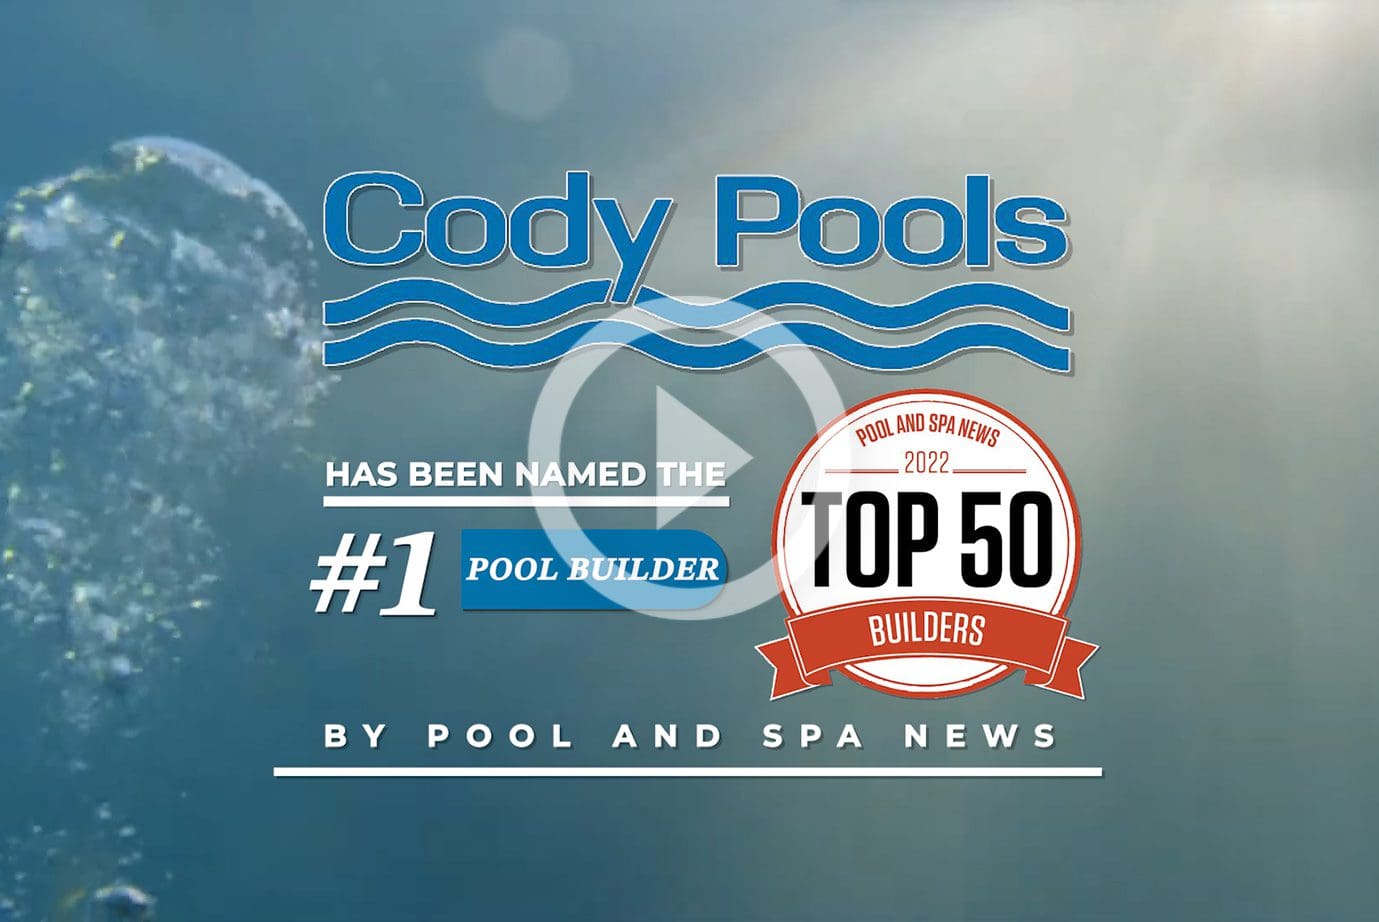 Cody Pools Named The #1 Pool Builder in the Nation for the 10th Year in a Row